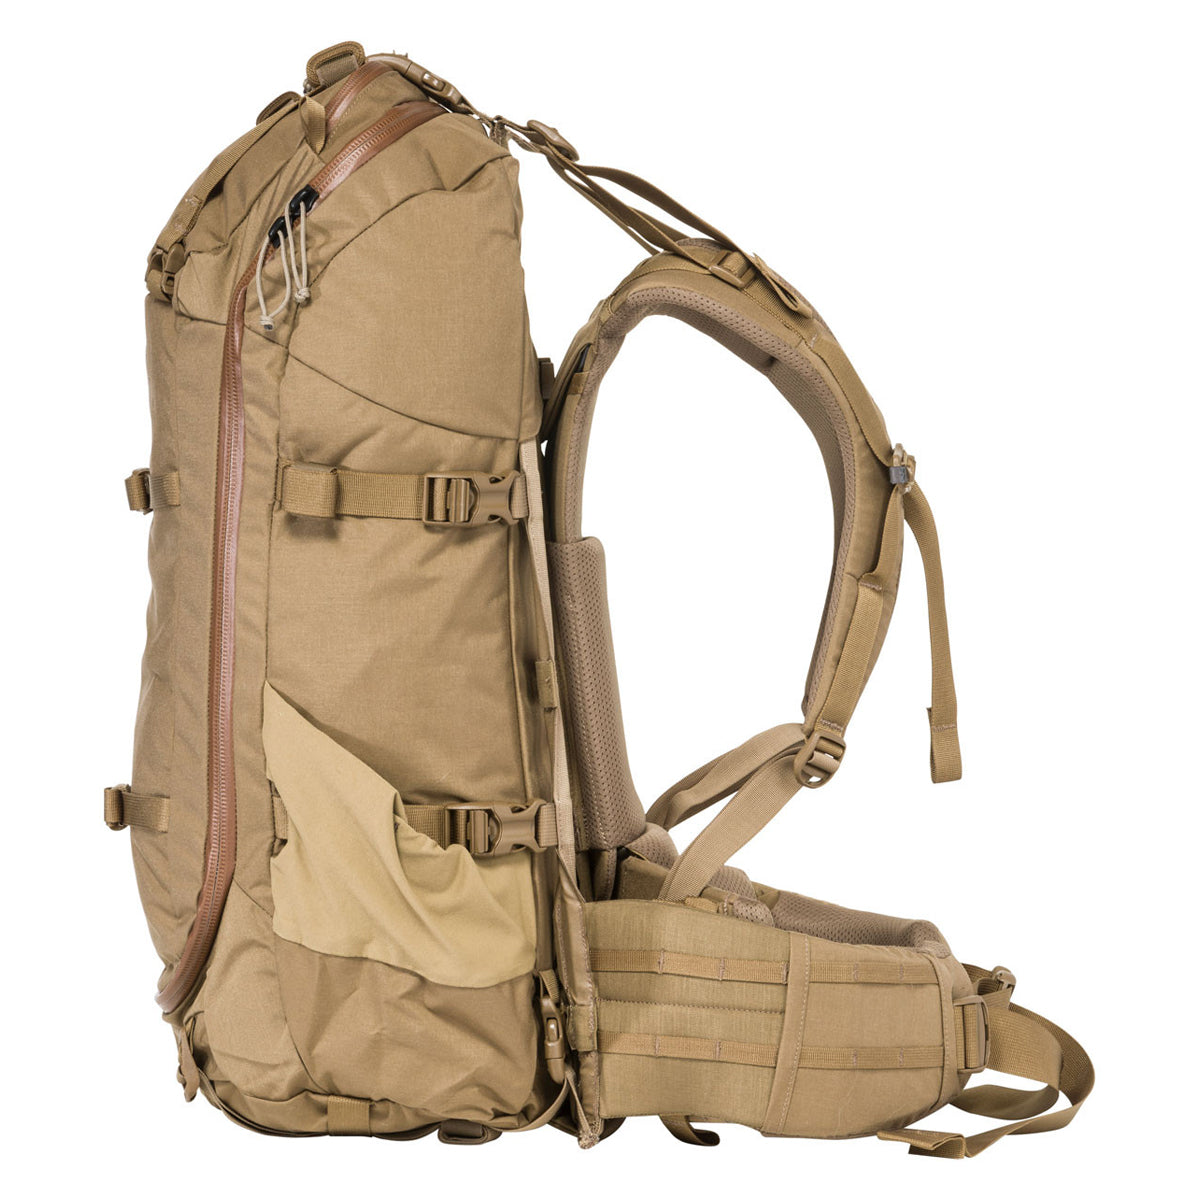 Mystery Ranch Sawtooth 45 Backpack in Mystery Ranch Sawtooth 45 Backpack (2020) by Mystery Ranch | Gear - goHUNT Shop by GOHUNT | Mystery Ranch - GOHUNT Shop